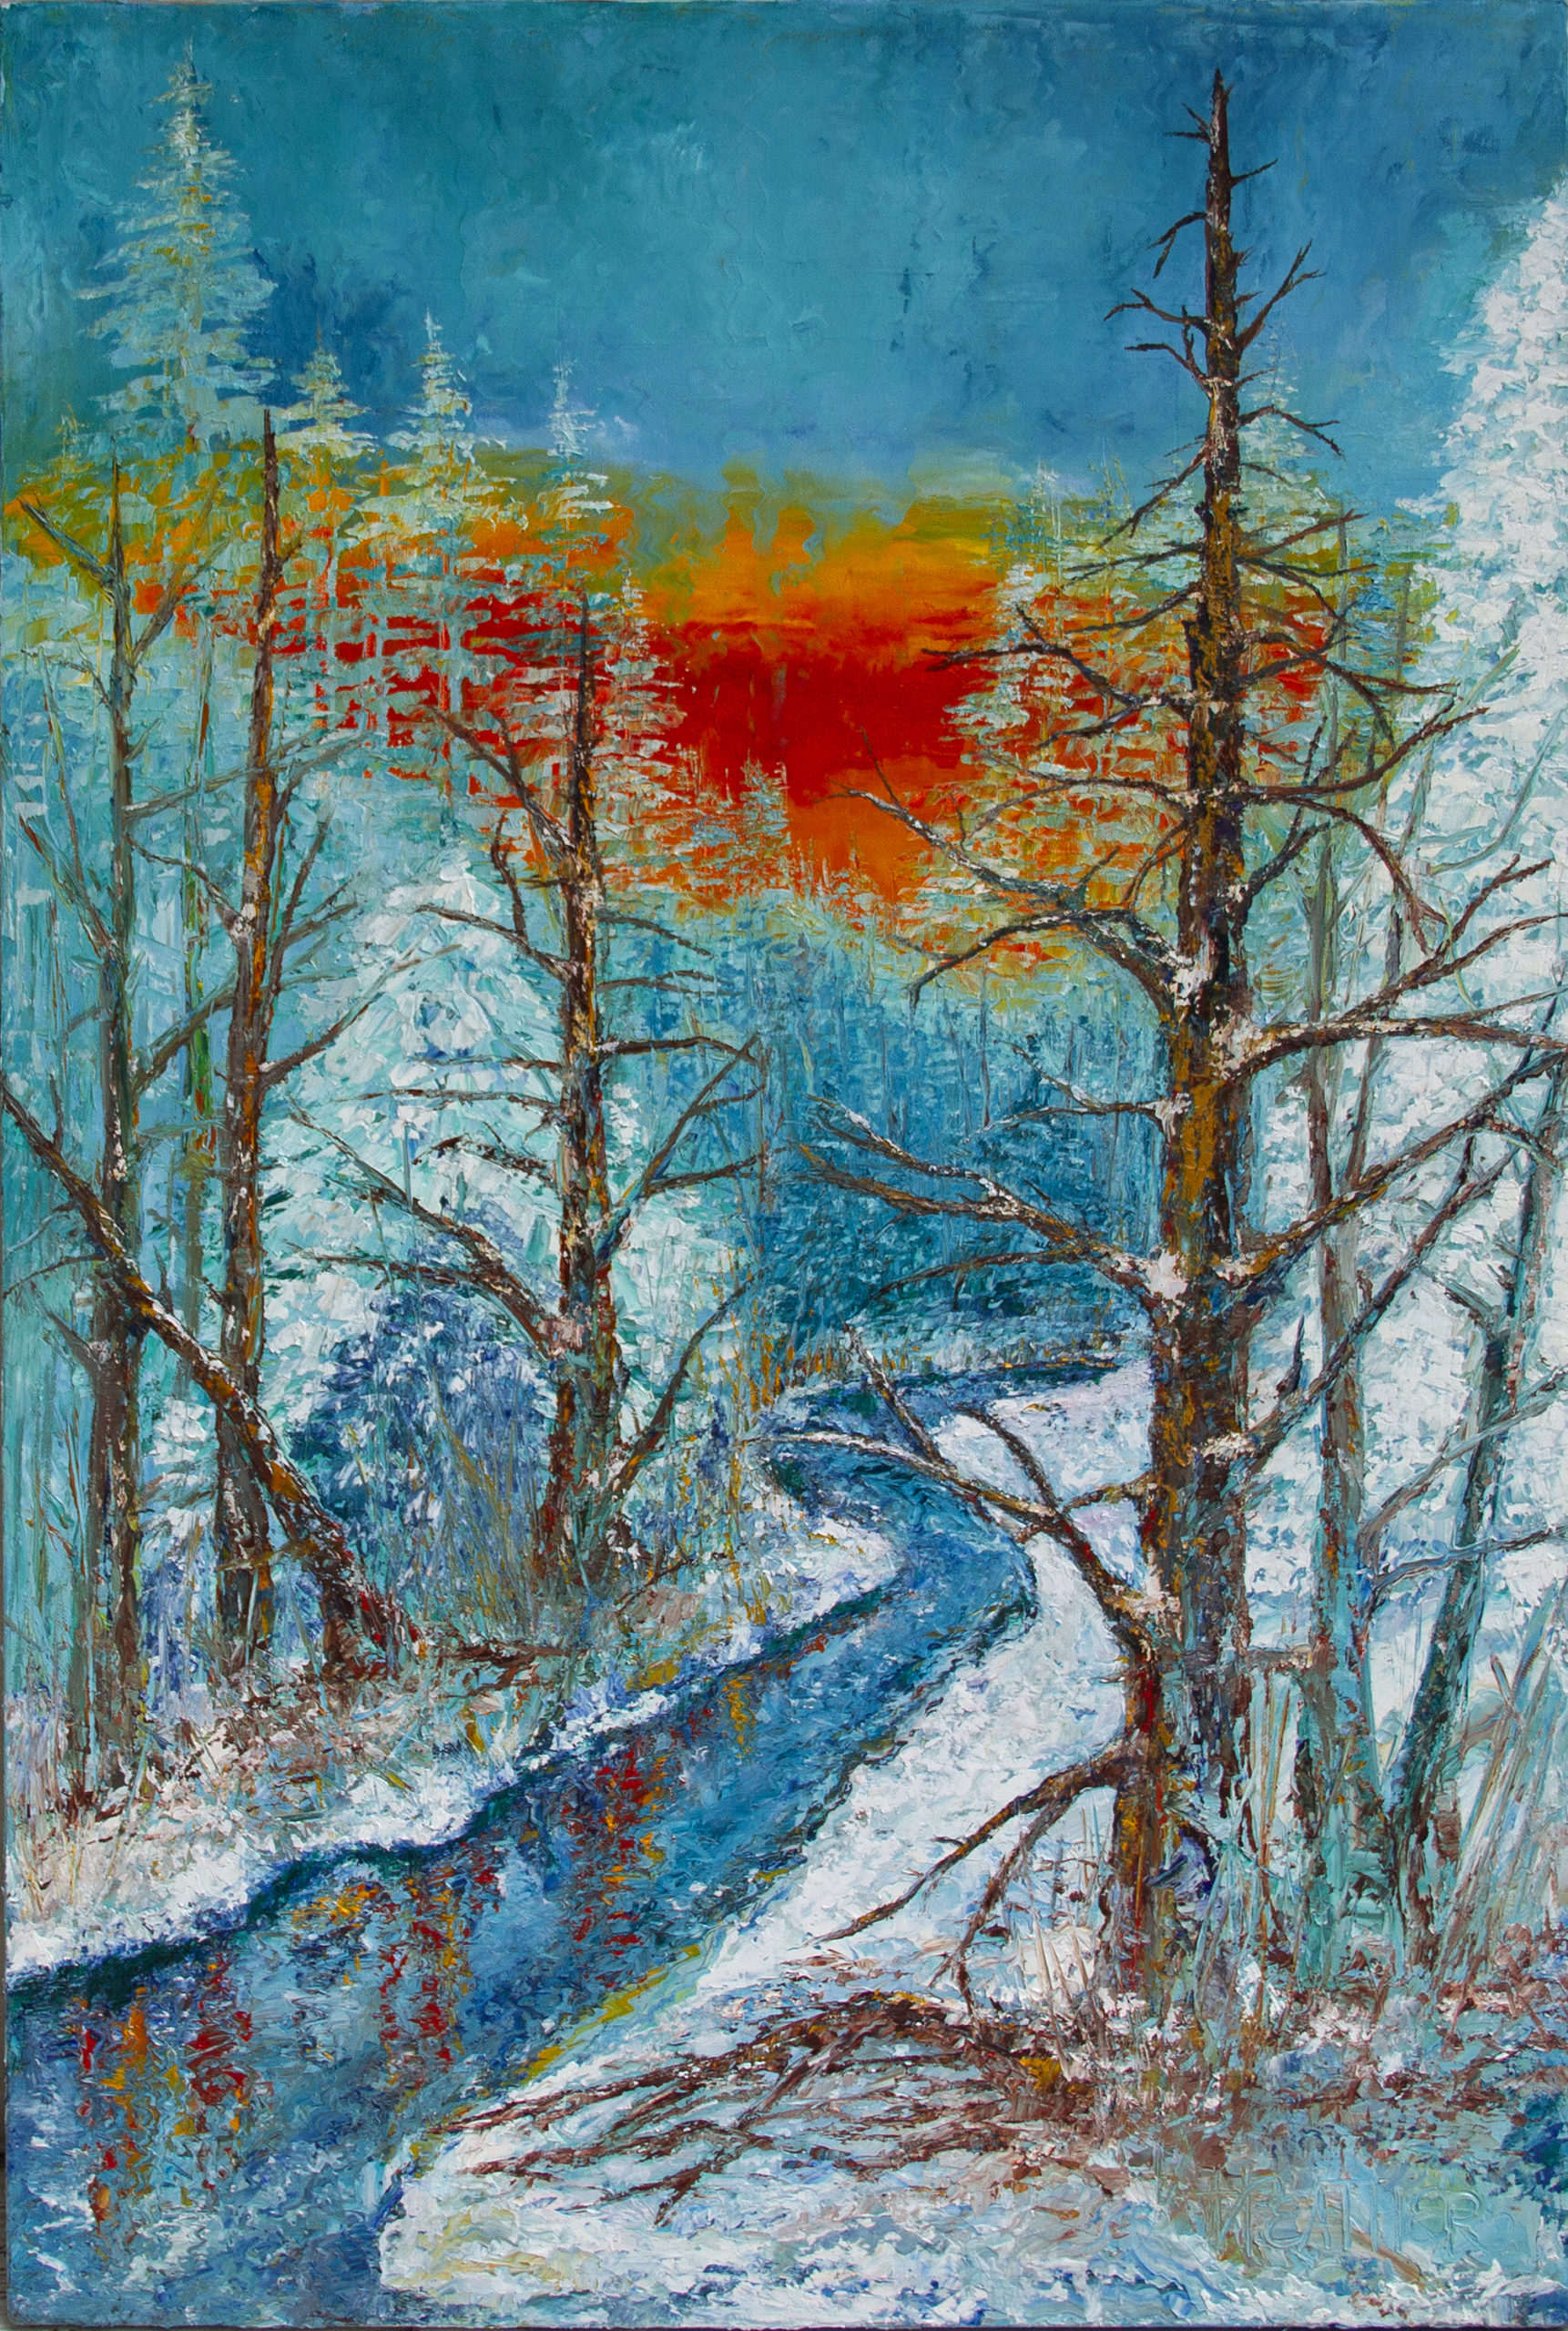 Upstream Gold Original Painting beautiful sunset, cold snowy day, snow covered creekside bank, river, stream, creek, bare trees